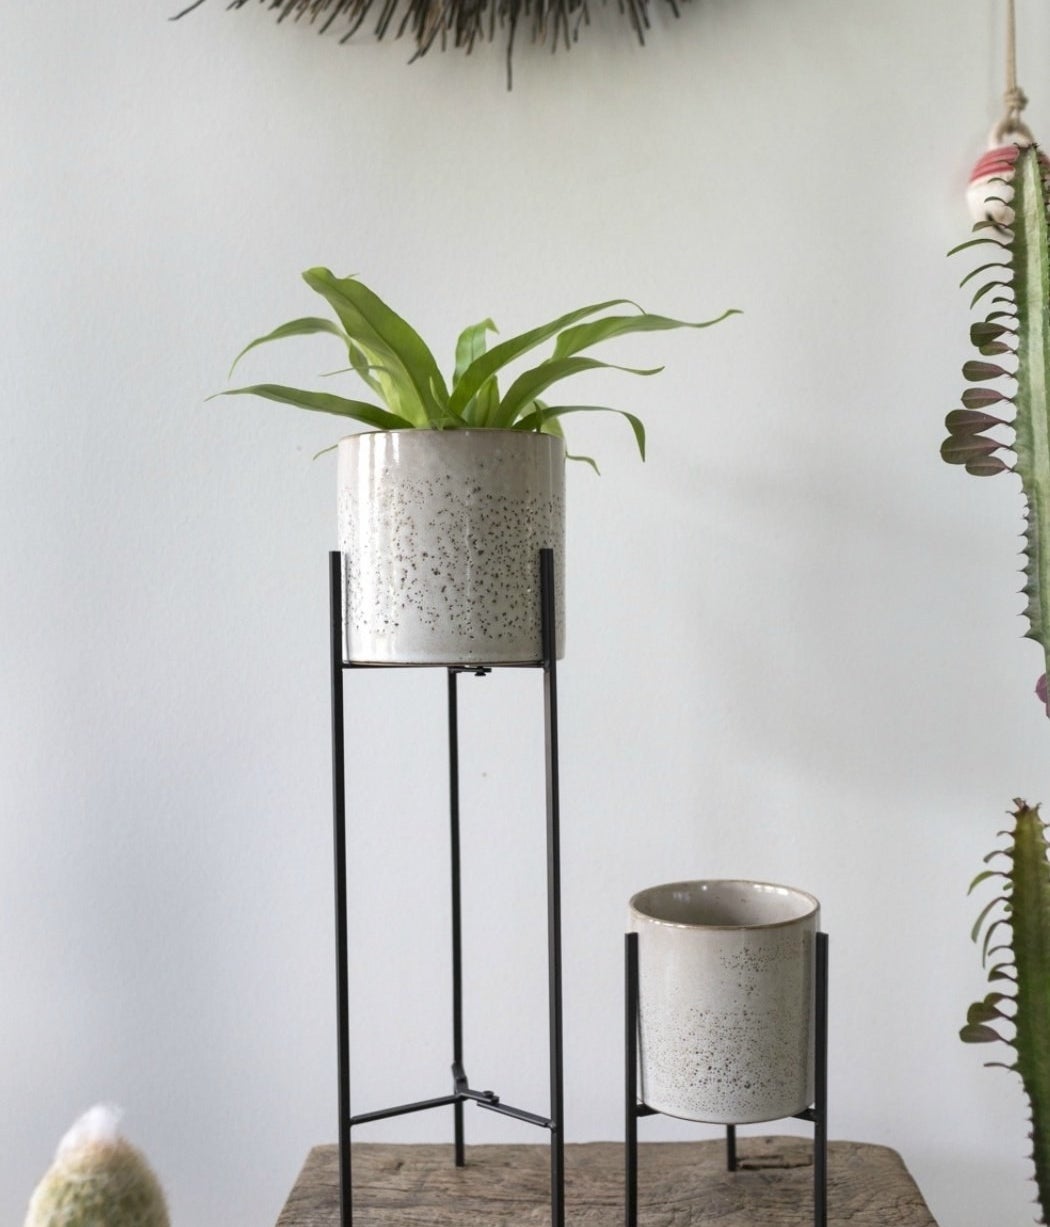 The black plant stand